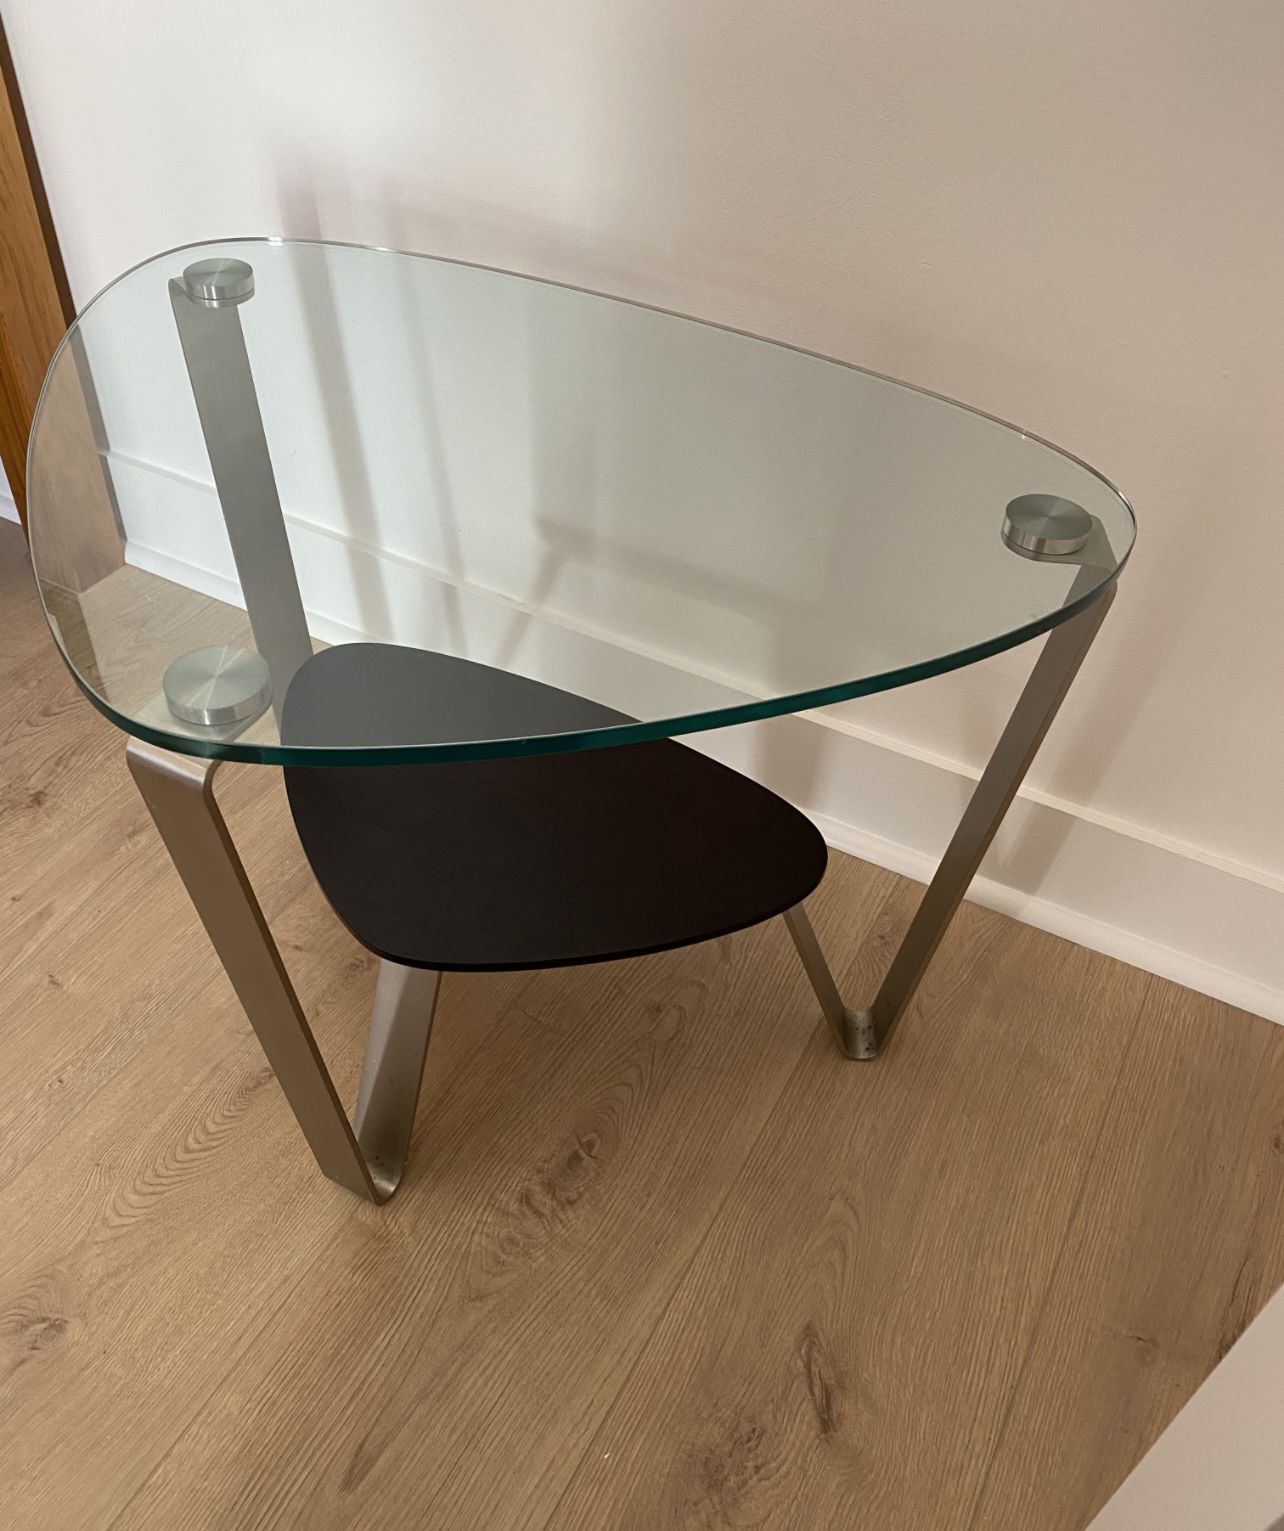 High End Designer End Table Tempered Glass Top, Stainless Steel Base And Ebony Wood Shelf